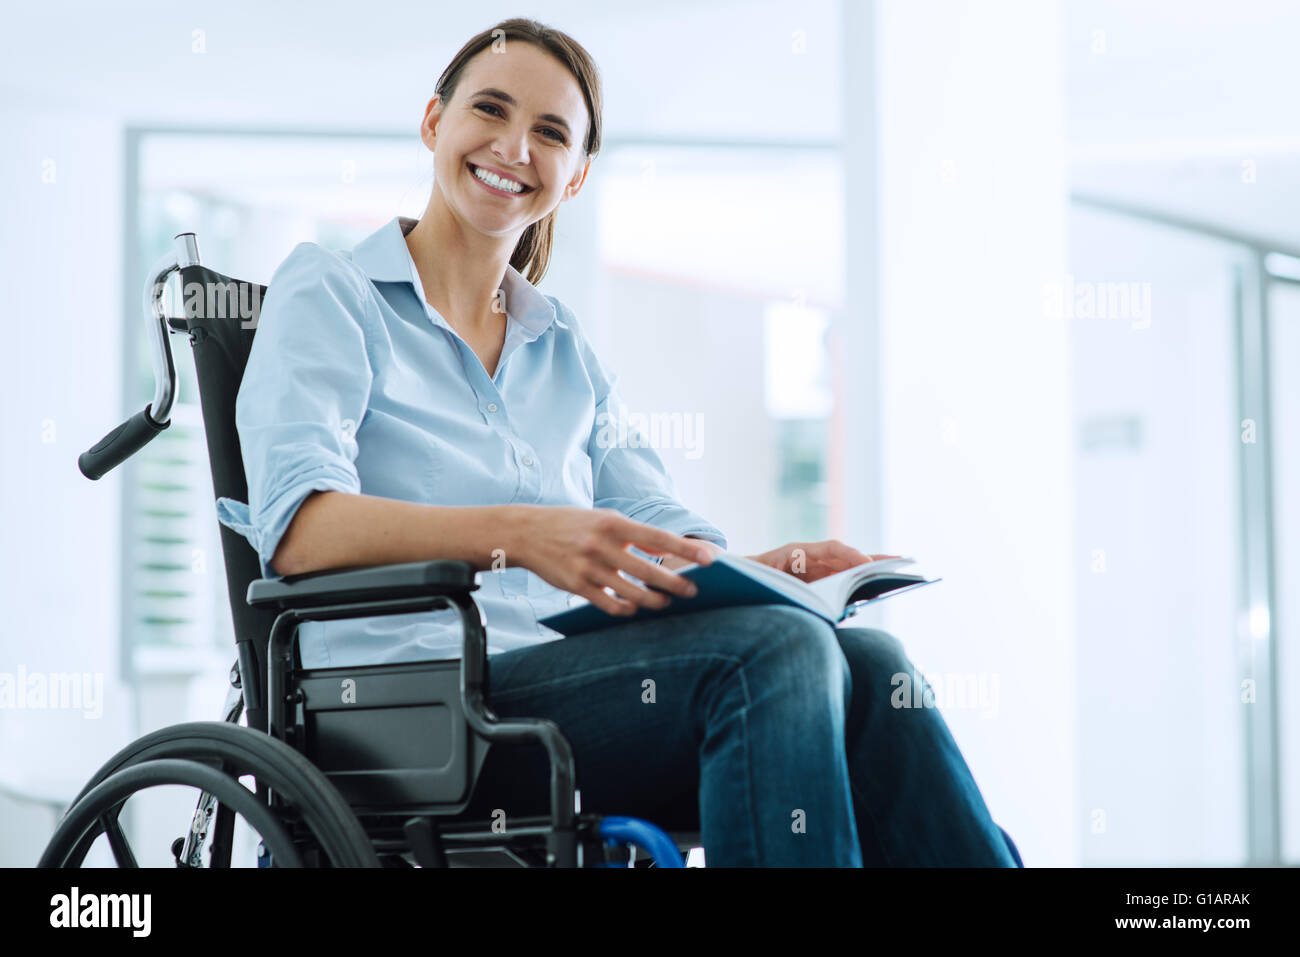 Smiling young woman in wheelchair looking at camera Banque D'Images